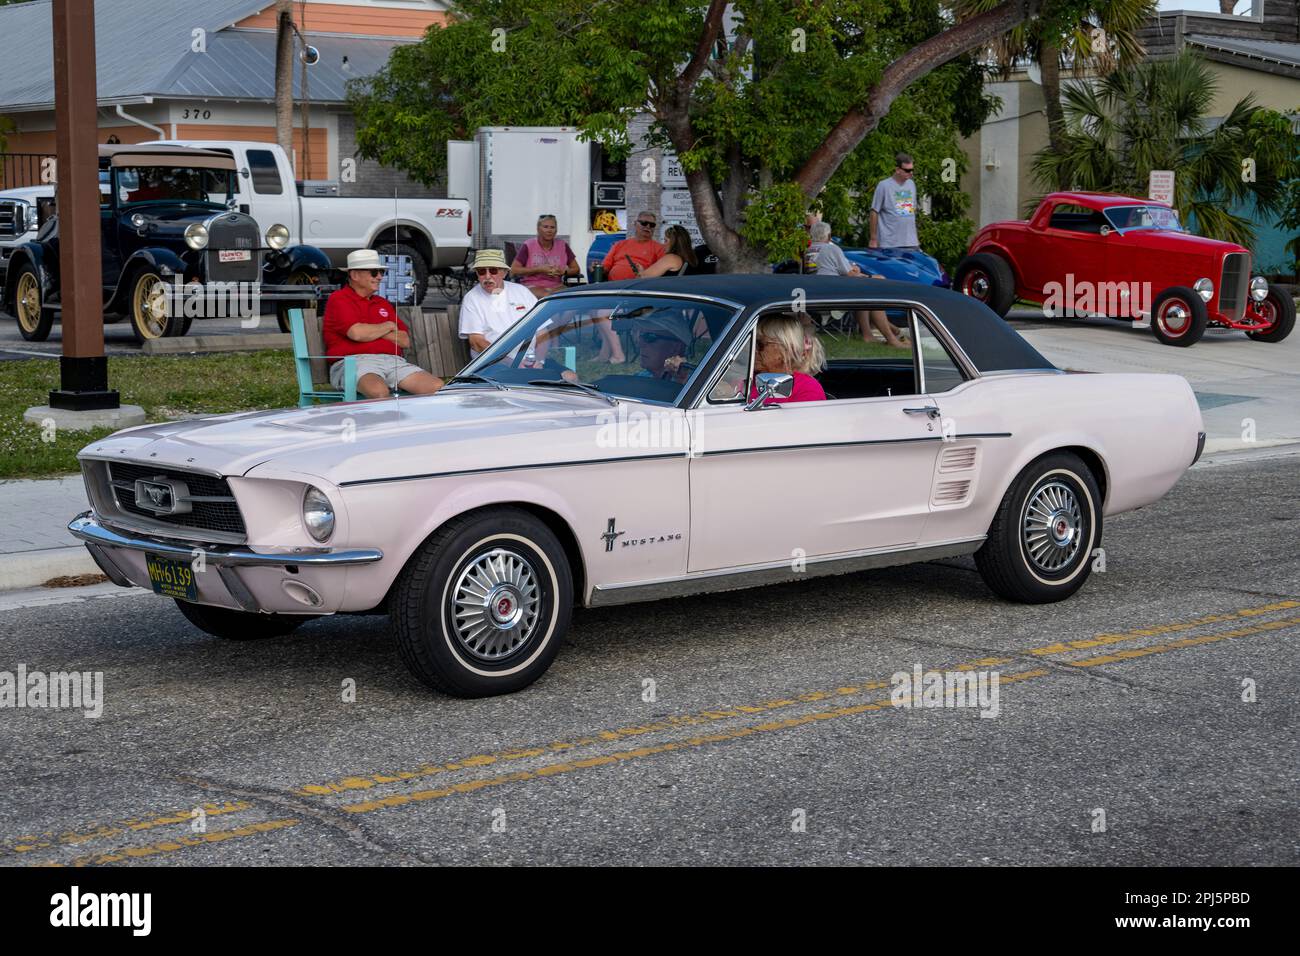 Pink Ford Mustang at Dearborn Street, Englewood, Florida Stock Photo